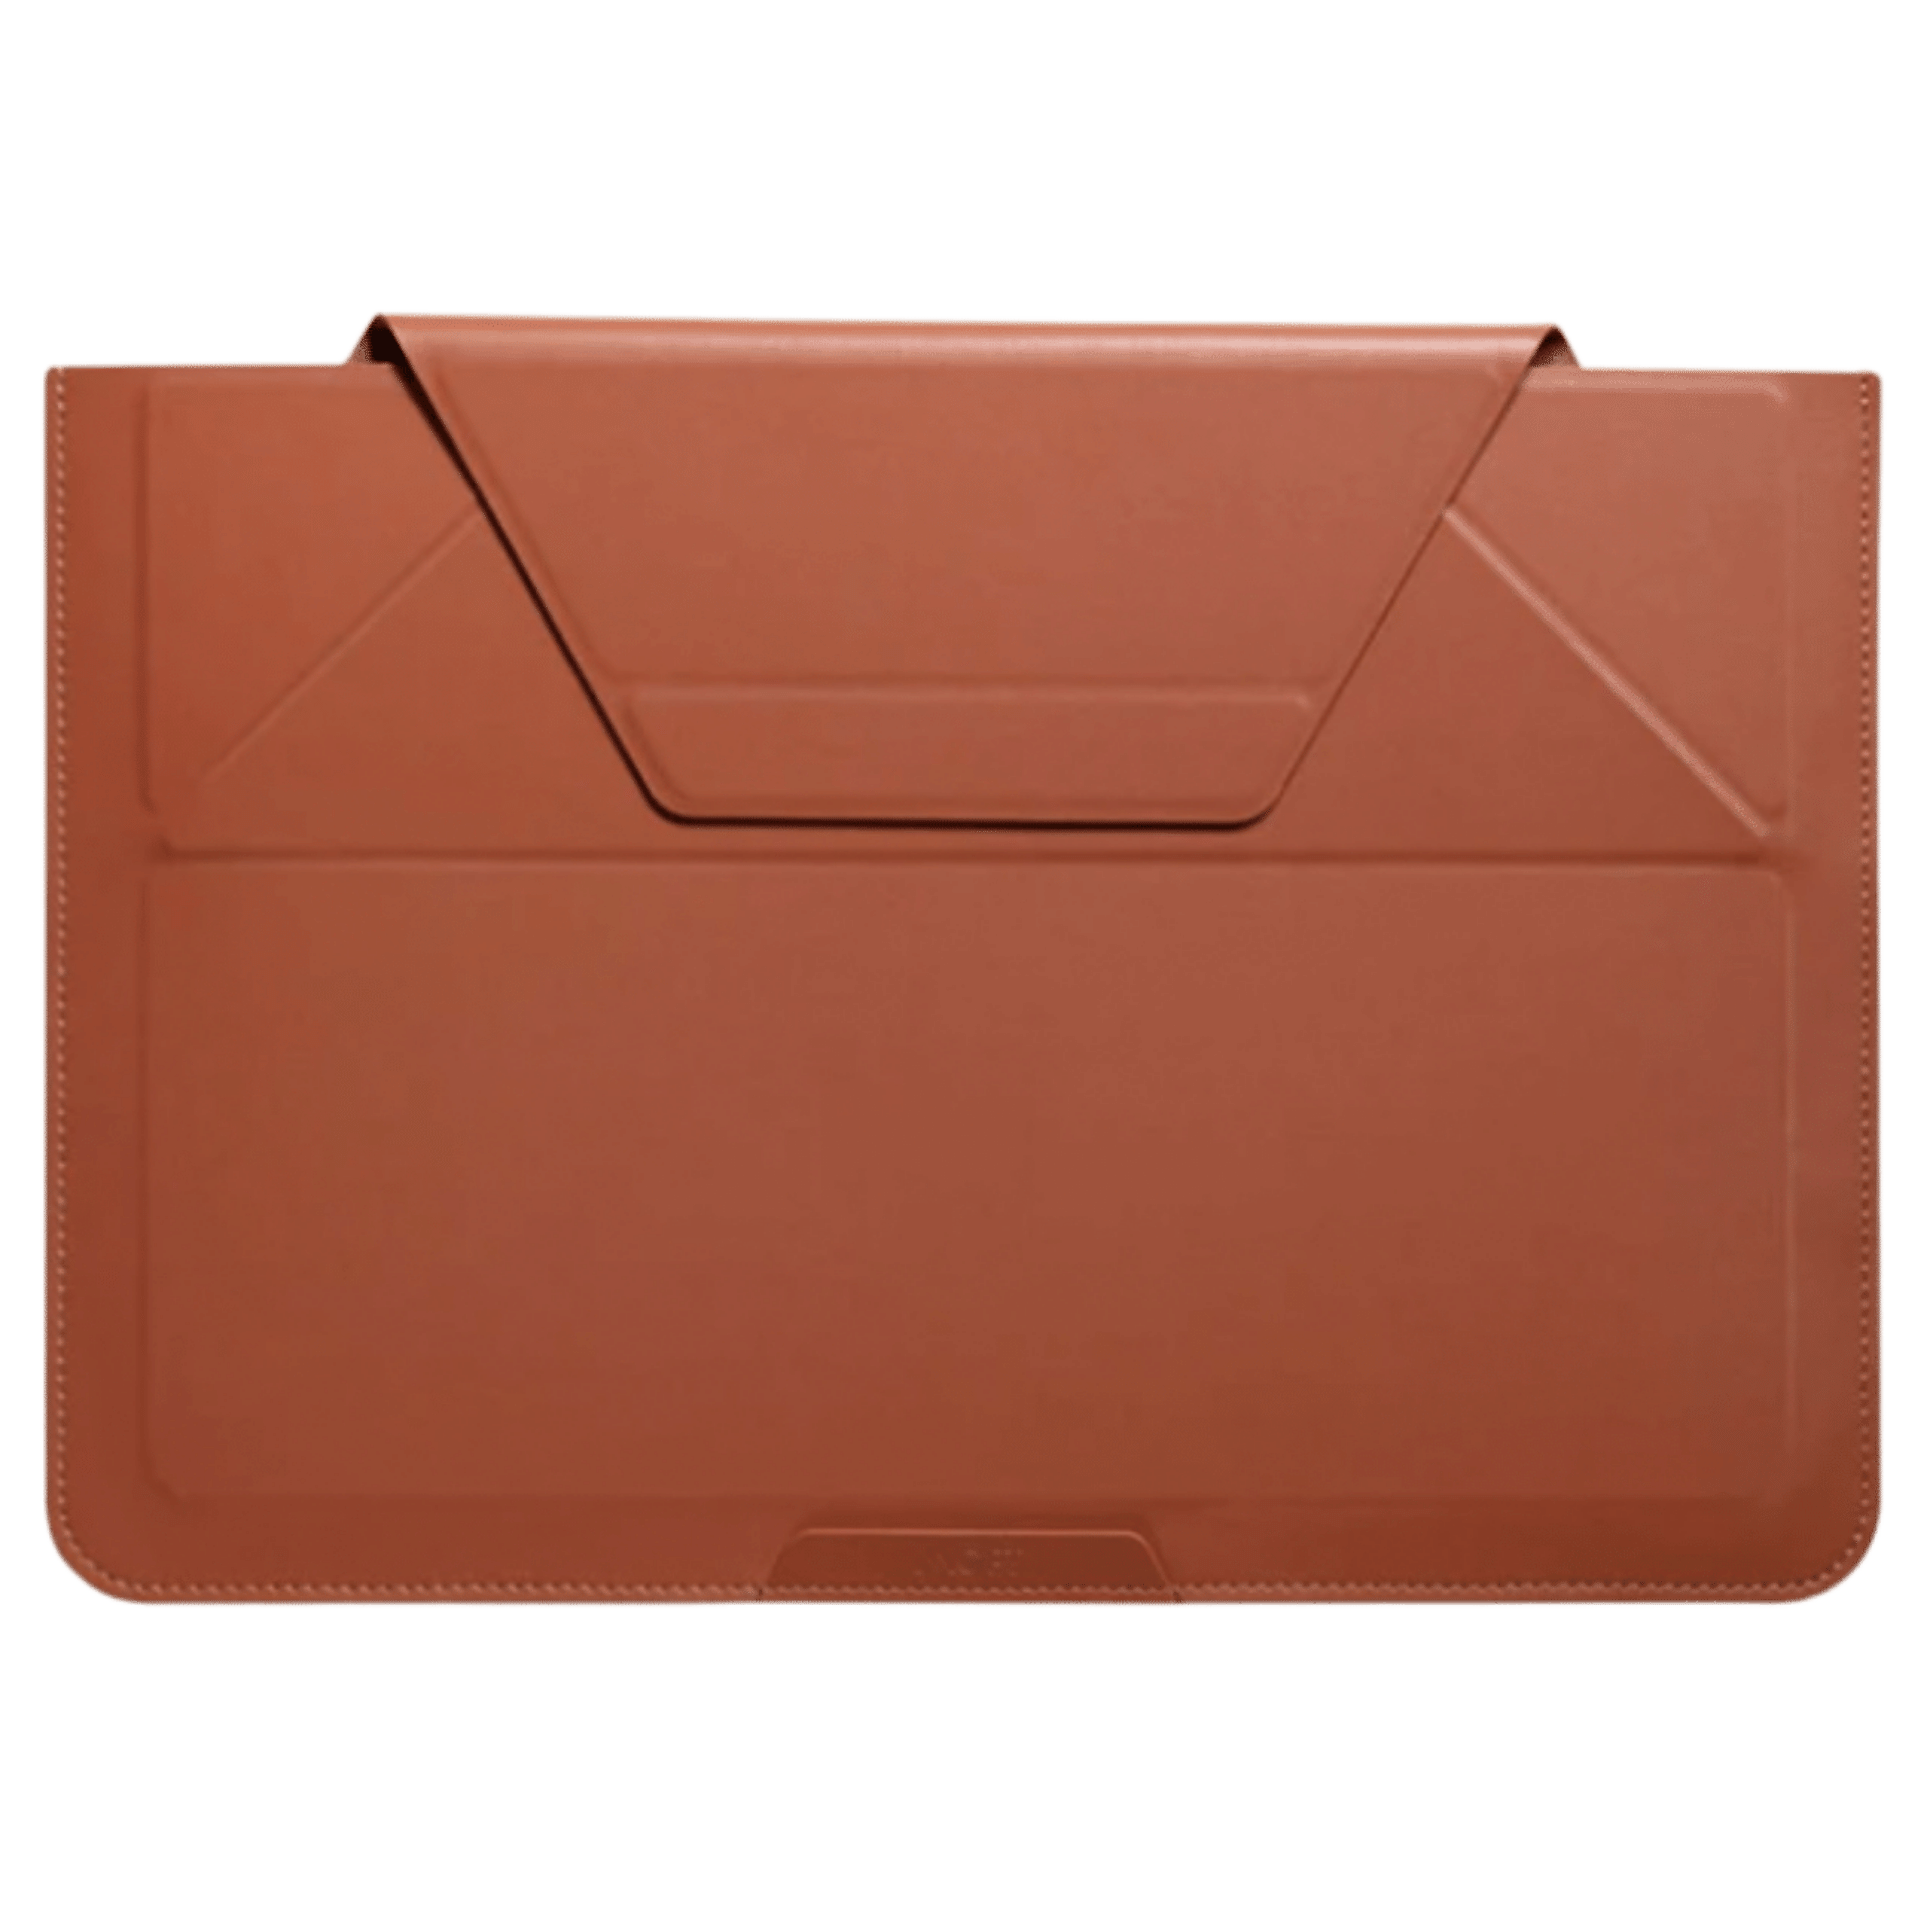 Moft Laptop Sleeve made from Vegan Leather